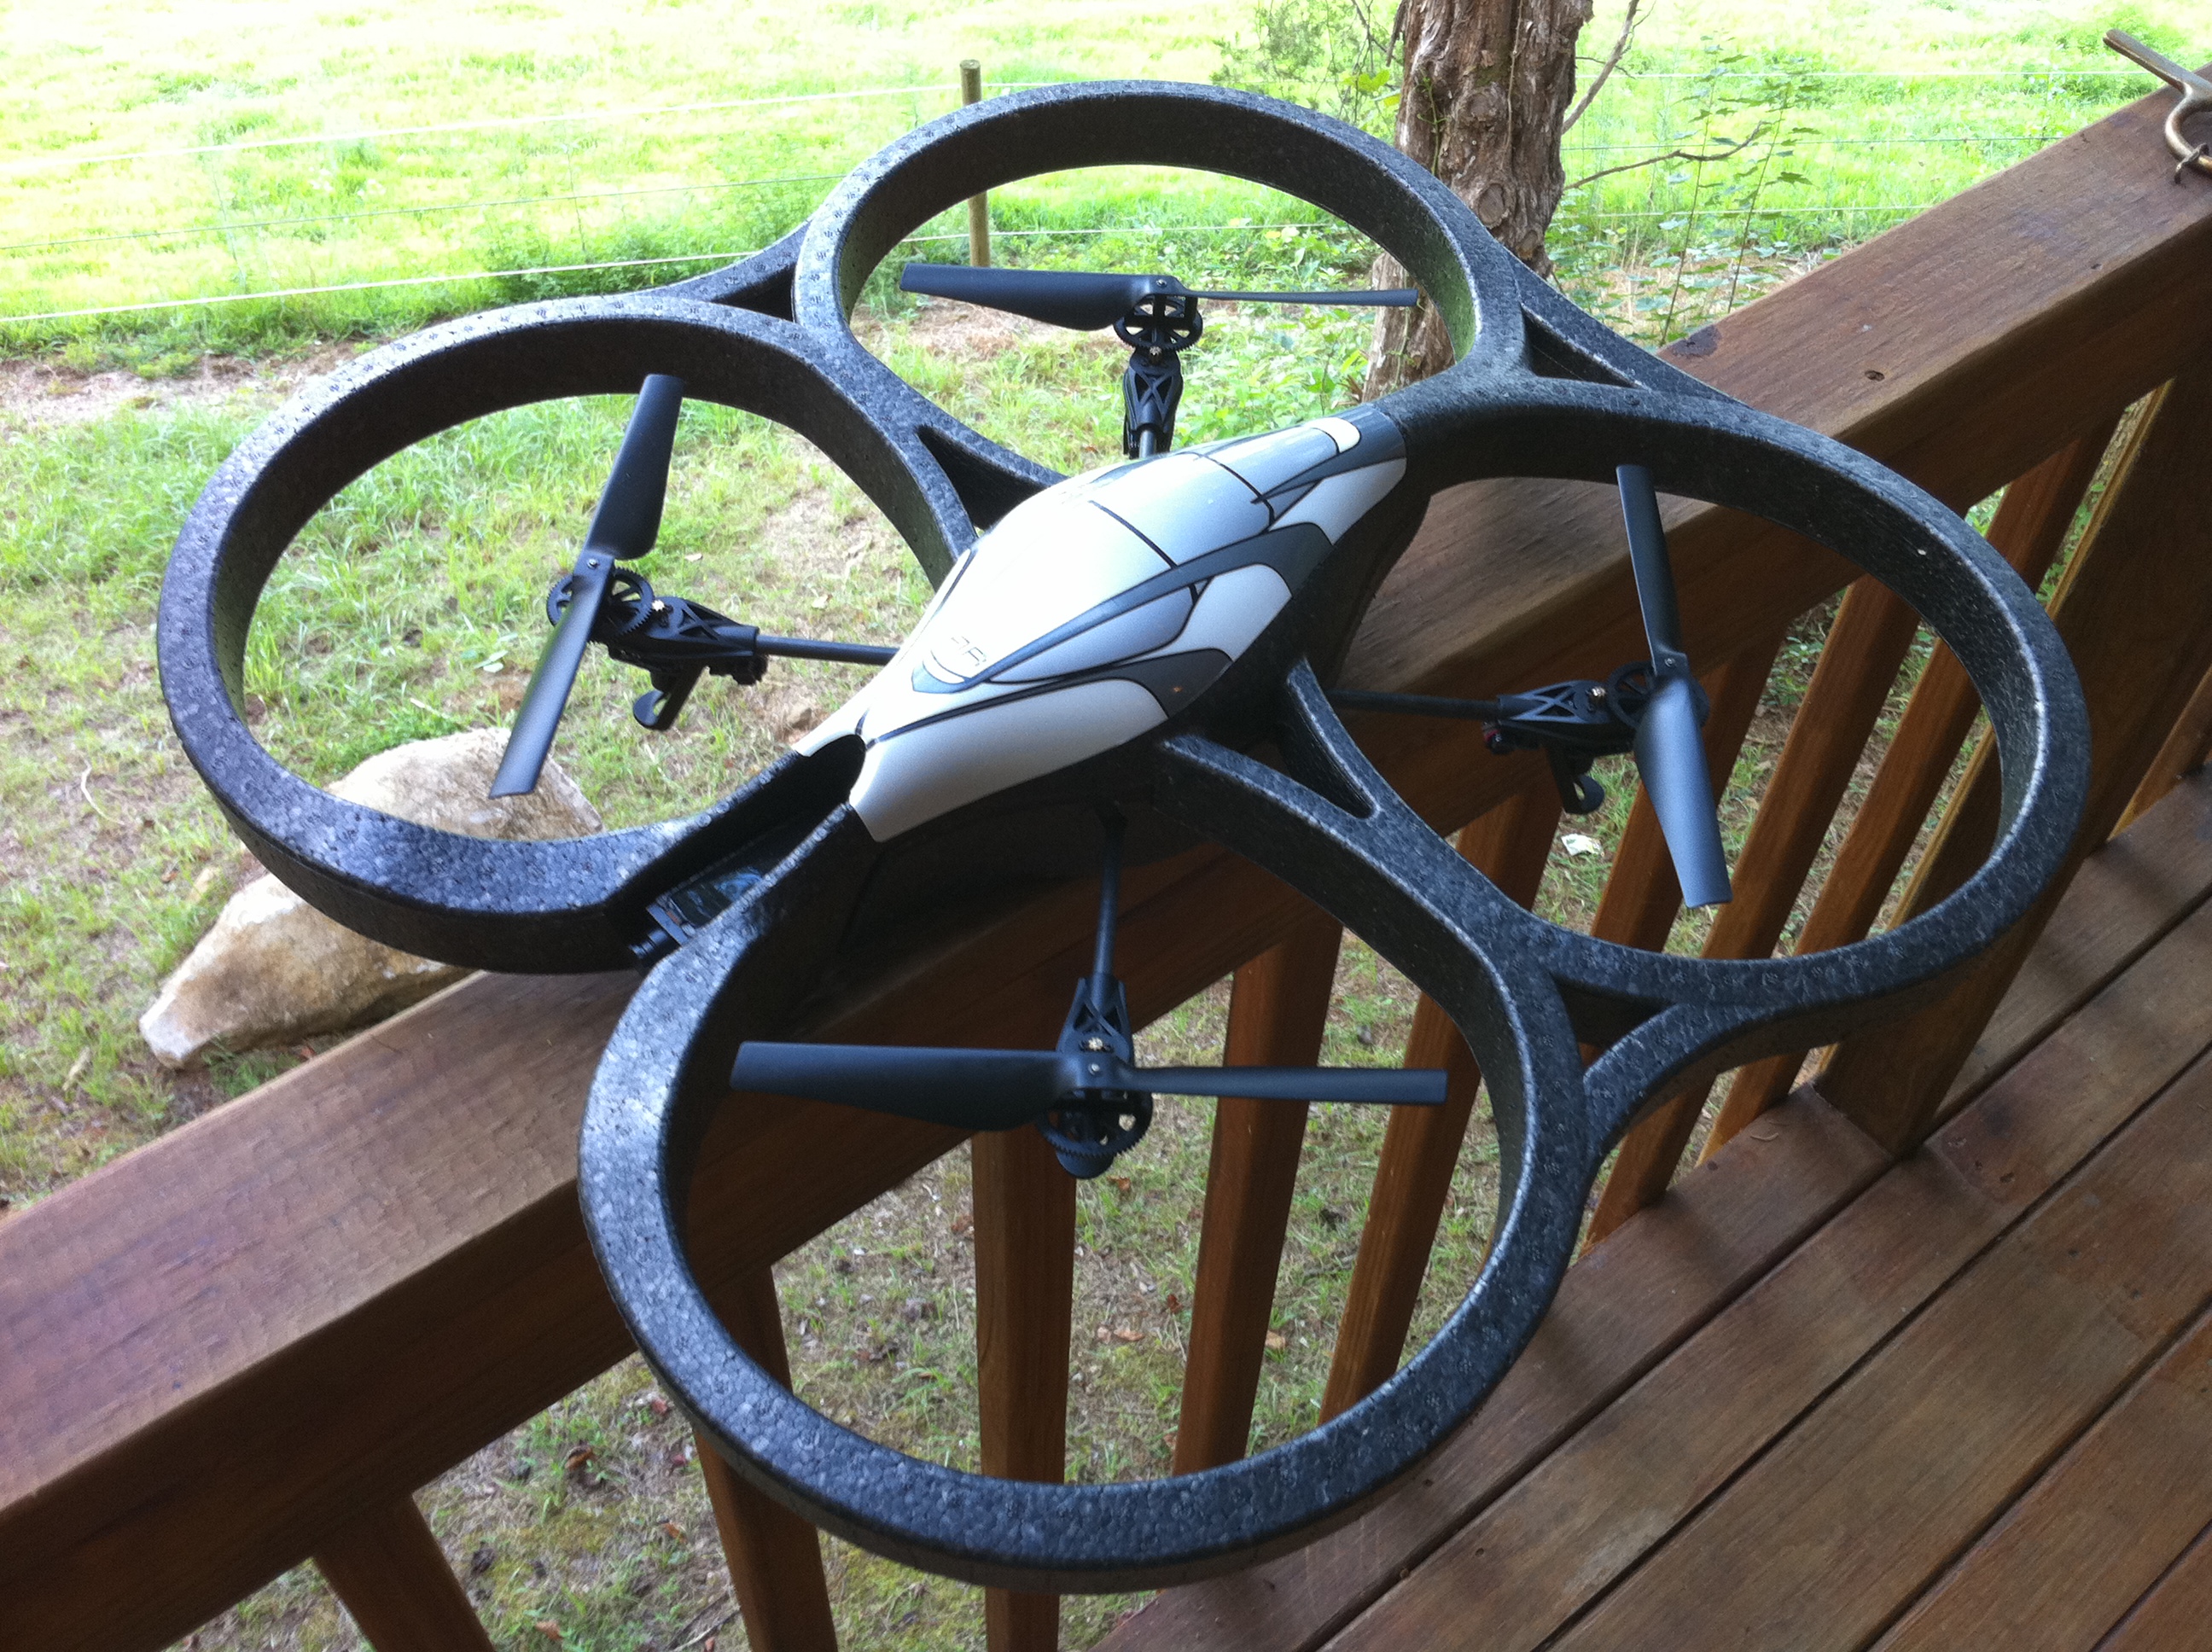 Papa avontuur gezantschap Parrot AR.Drone Review – The Coolest RC Toy I've Played With – TouchArcade